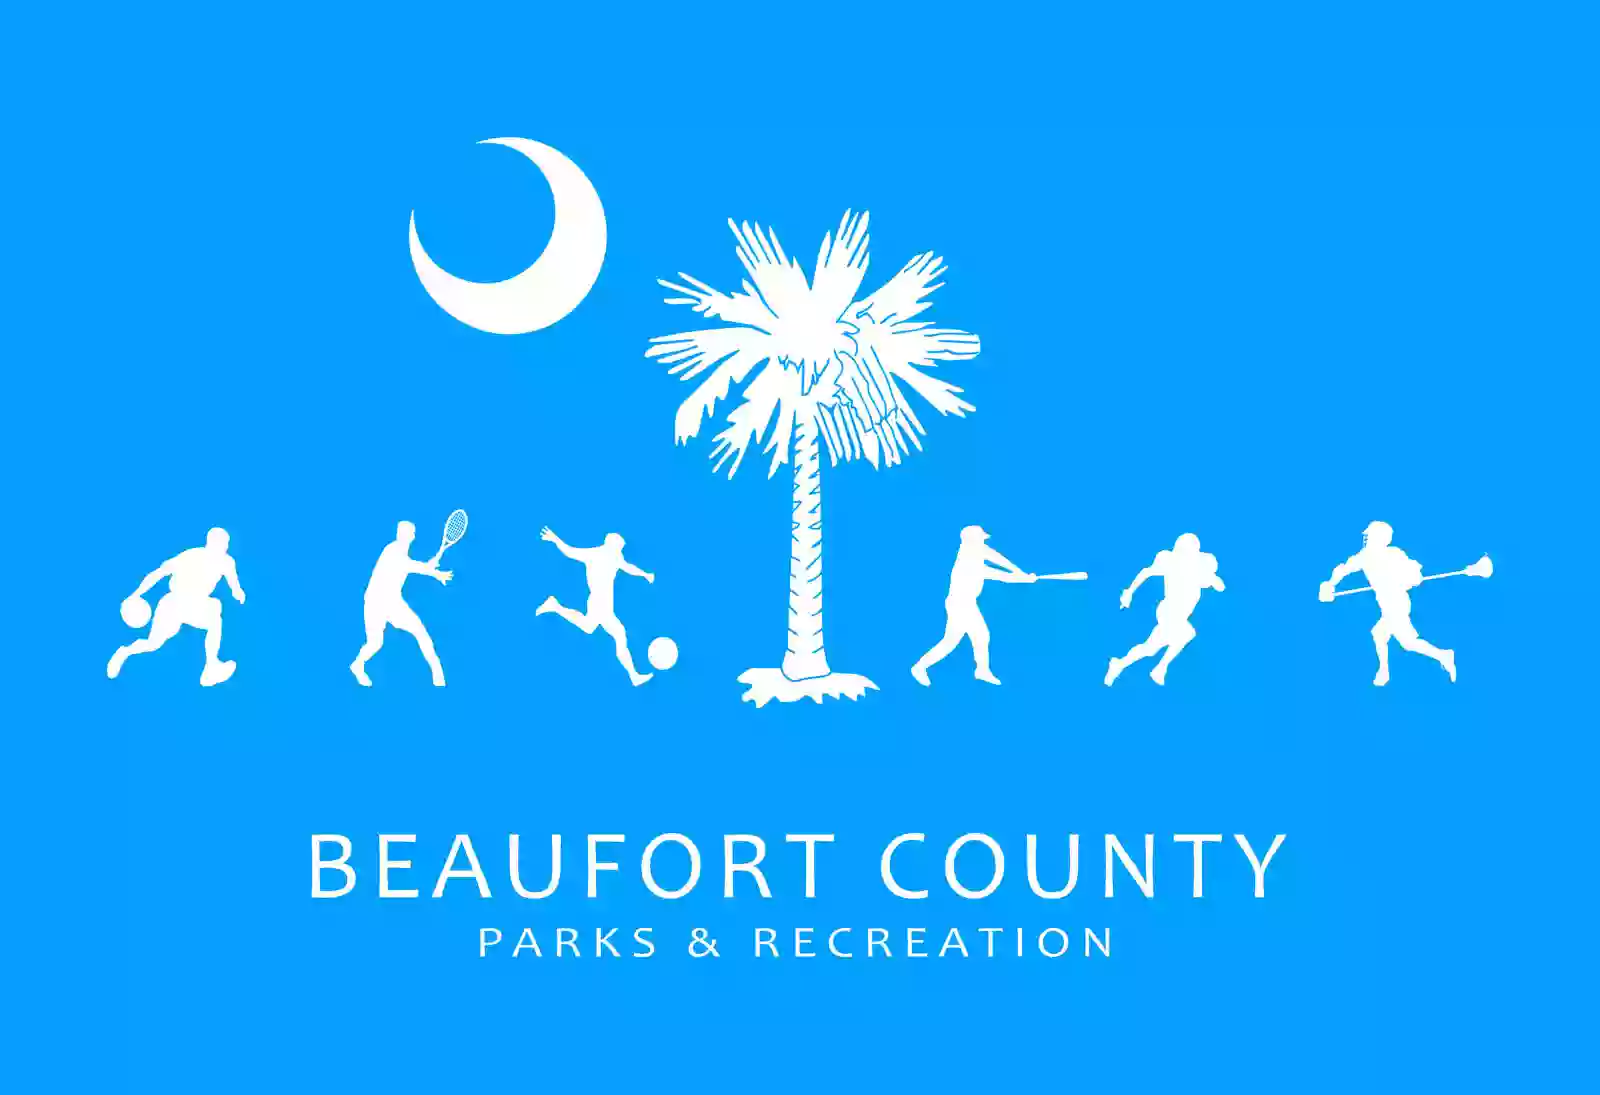 Beaufort County Parks and Recreation Administration